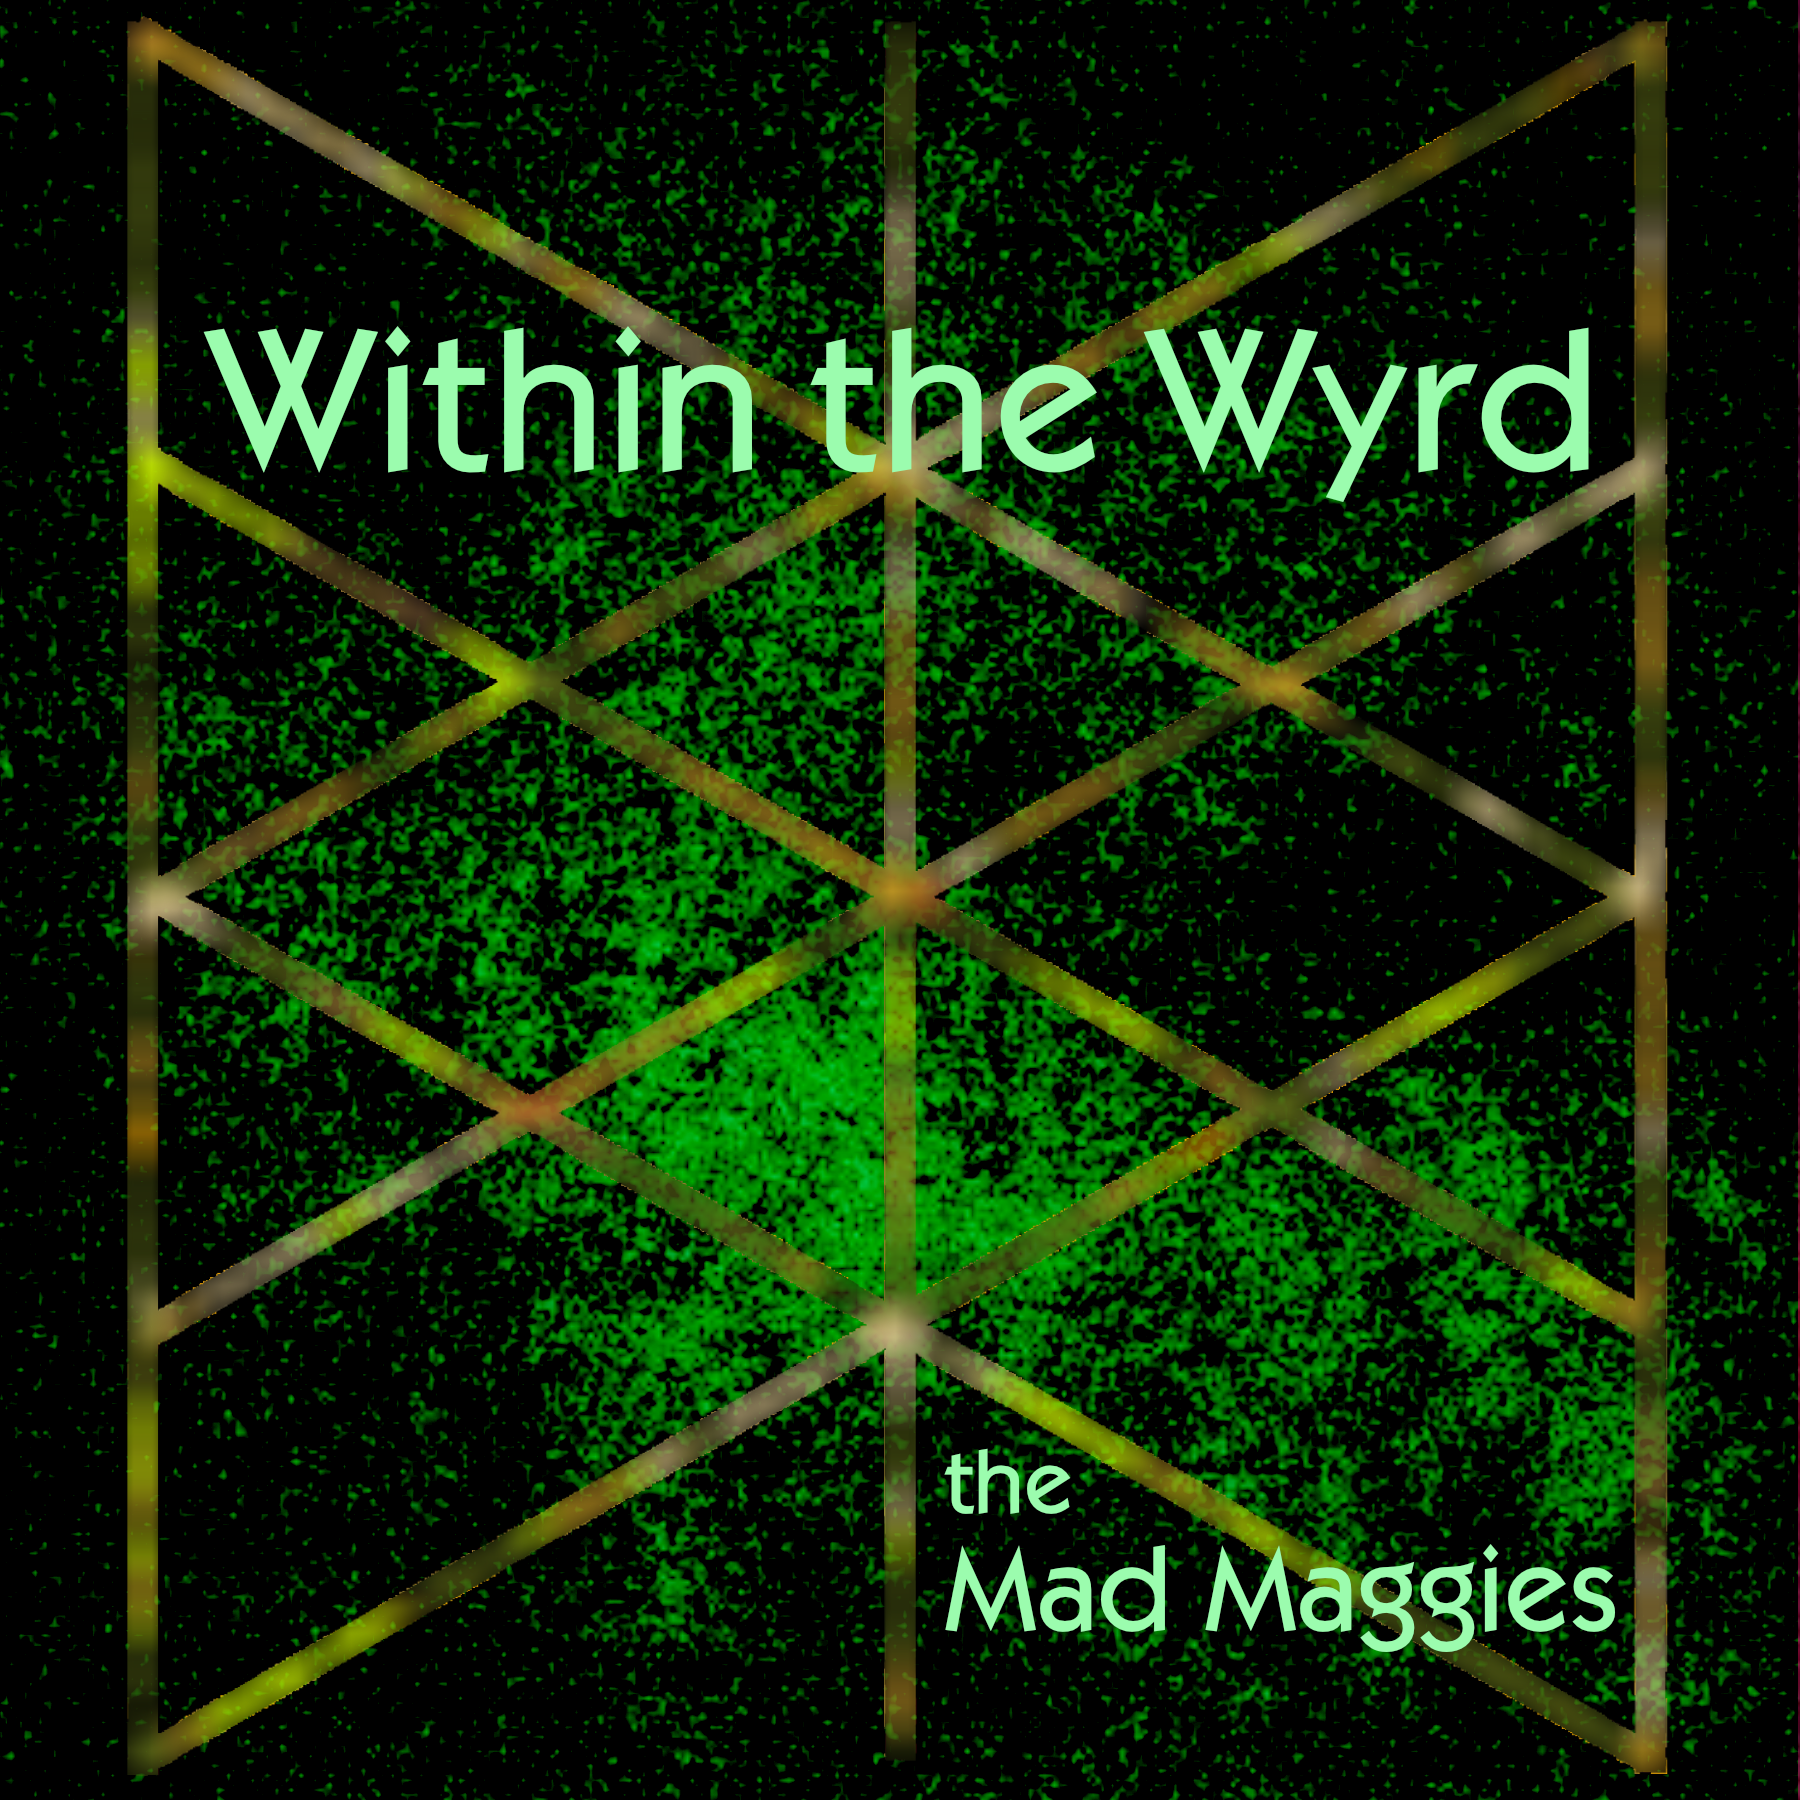 New Release: Within the Wyrd